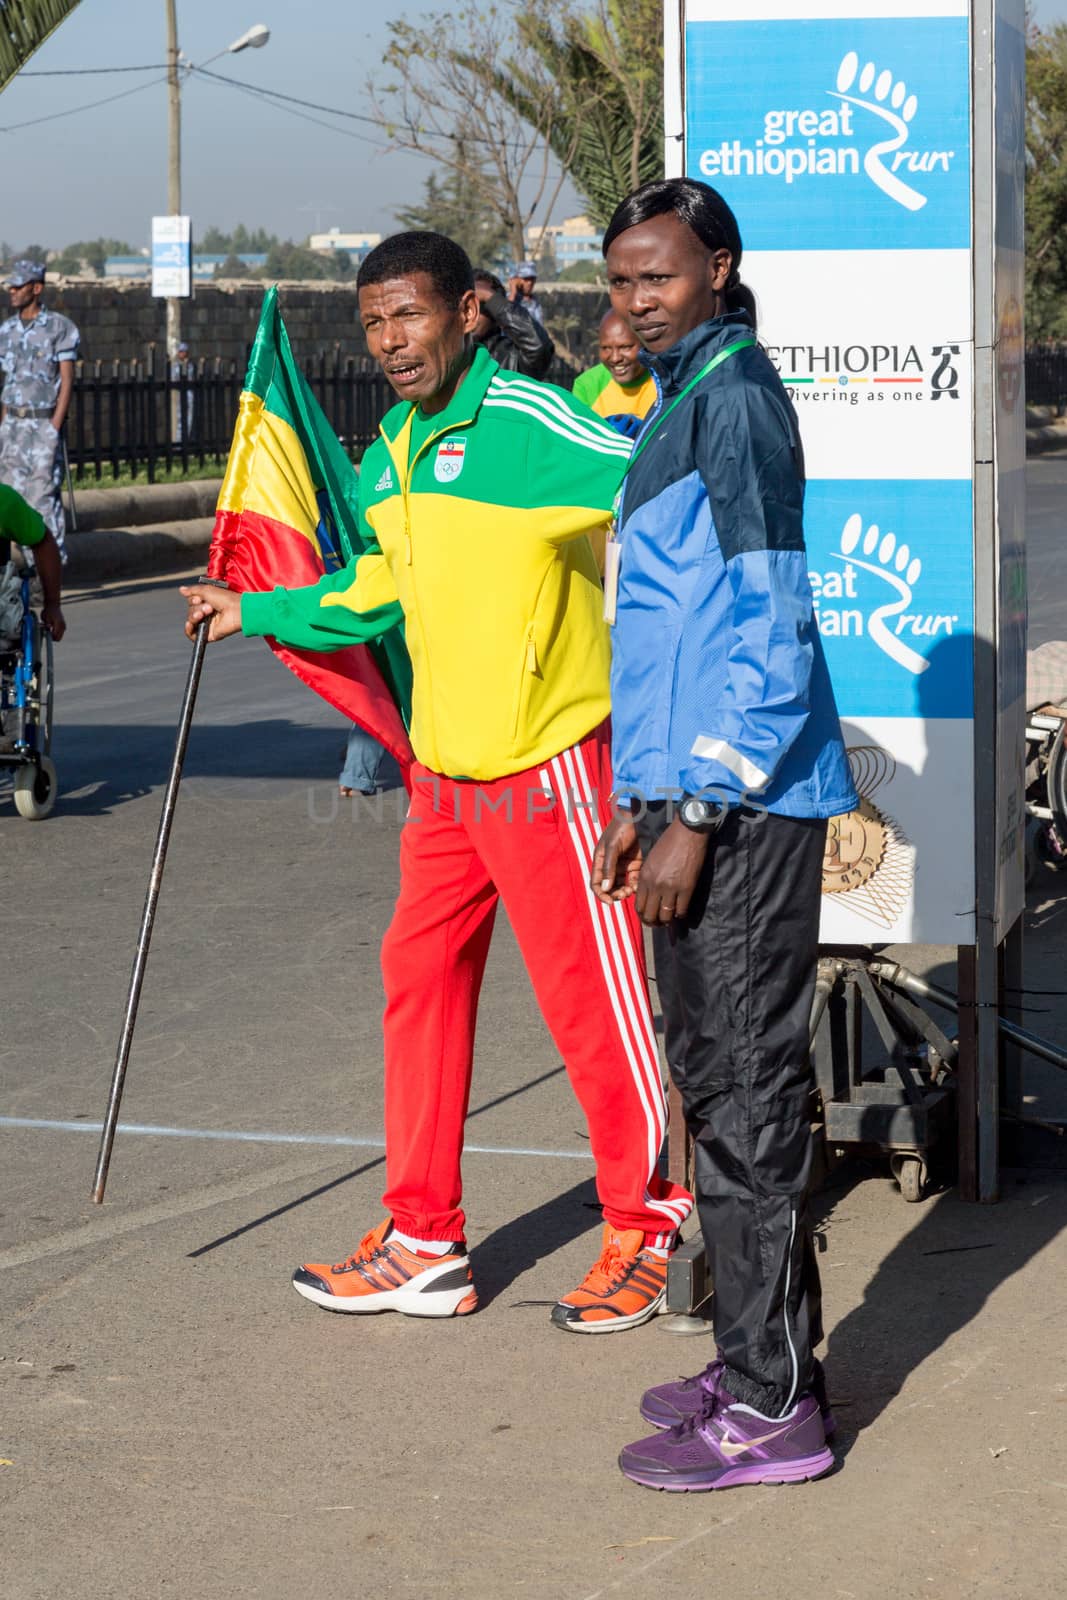 Haile Gebrselassie and Priscah Jeptoo by derejeb